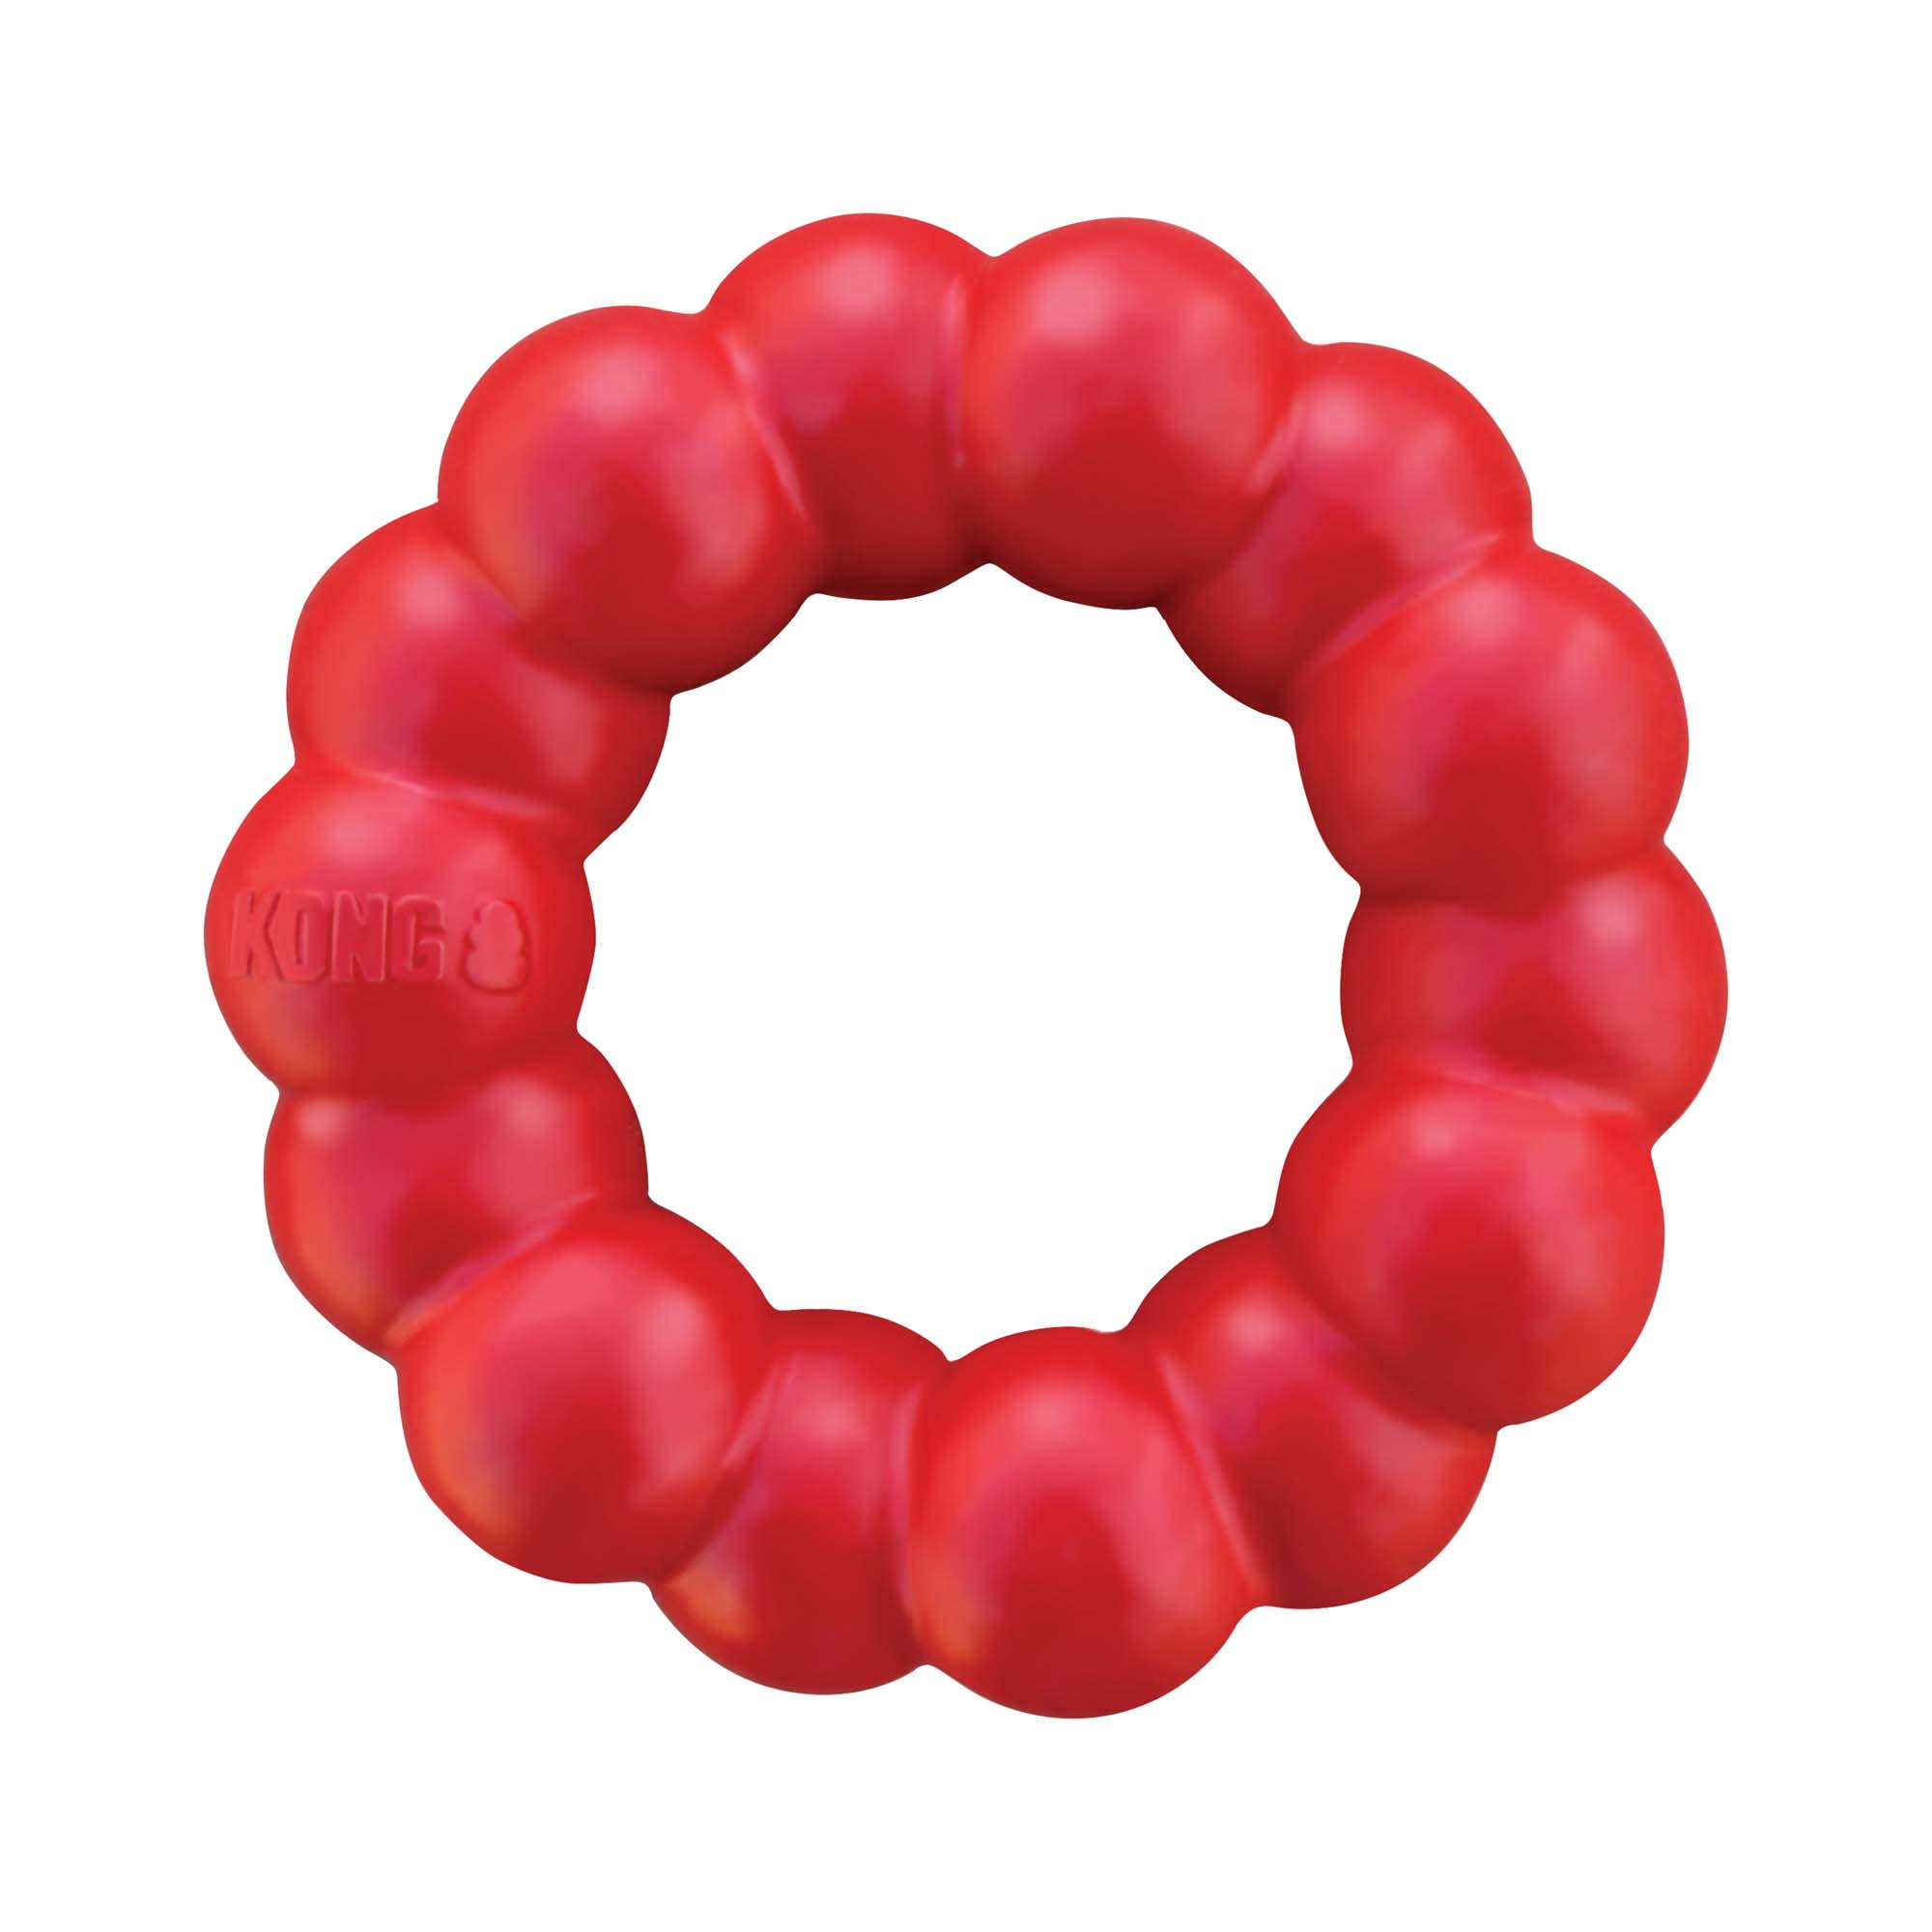 Photos - Dog Toy KONG Ring, Small, Red KM2 